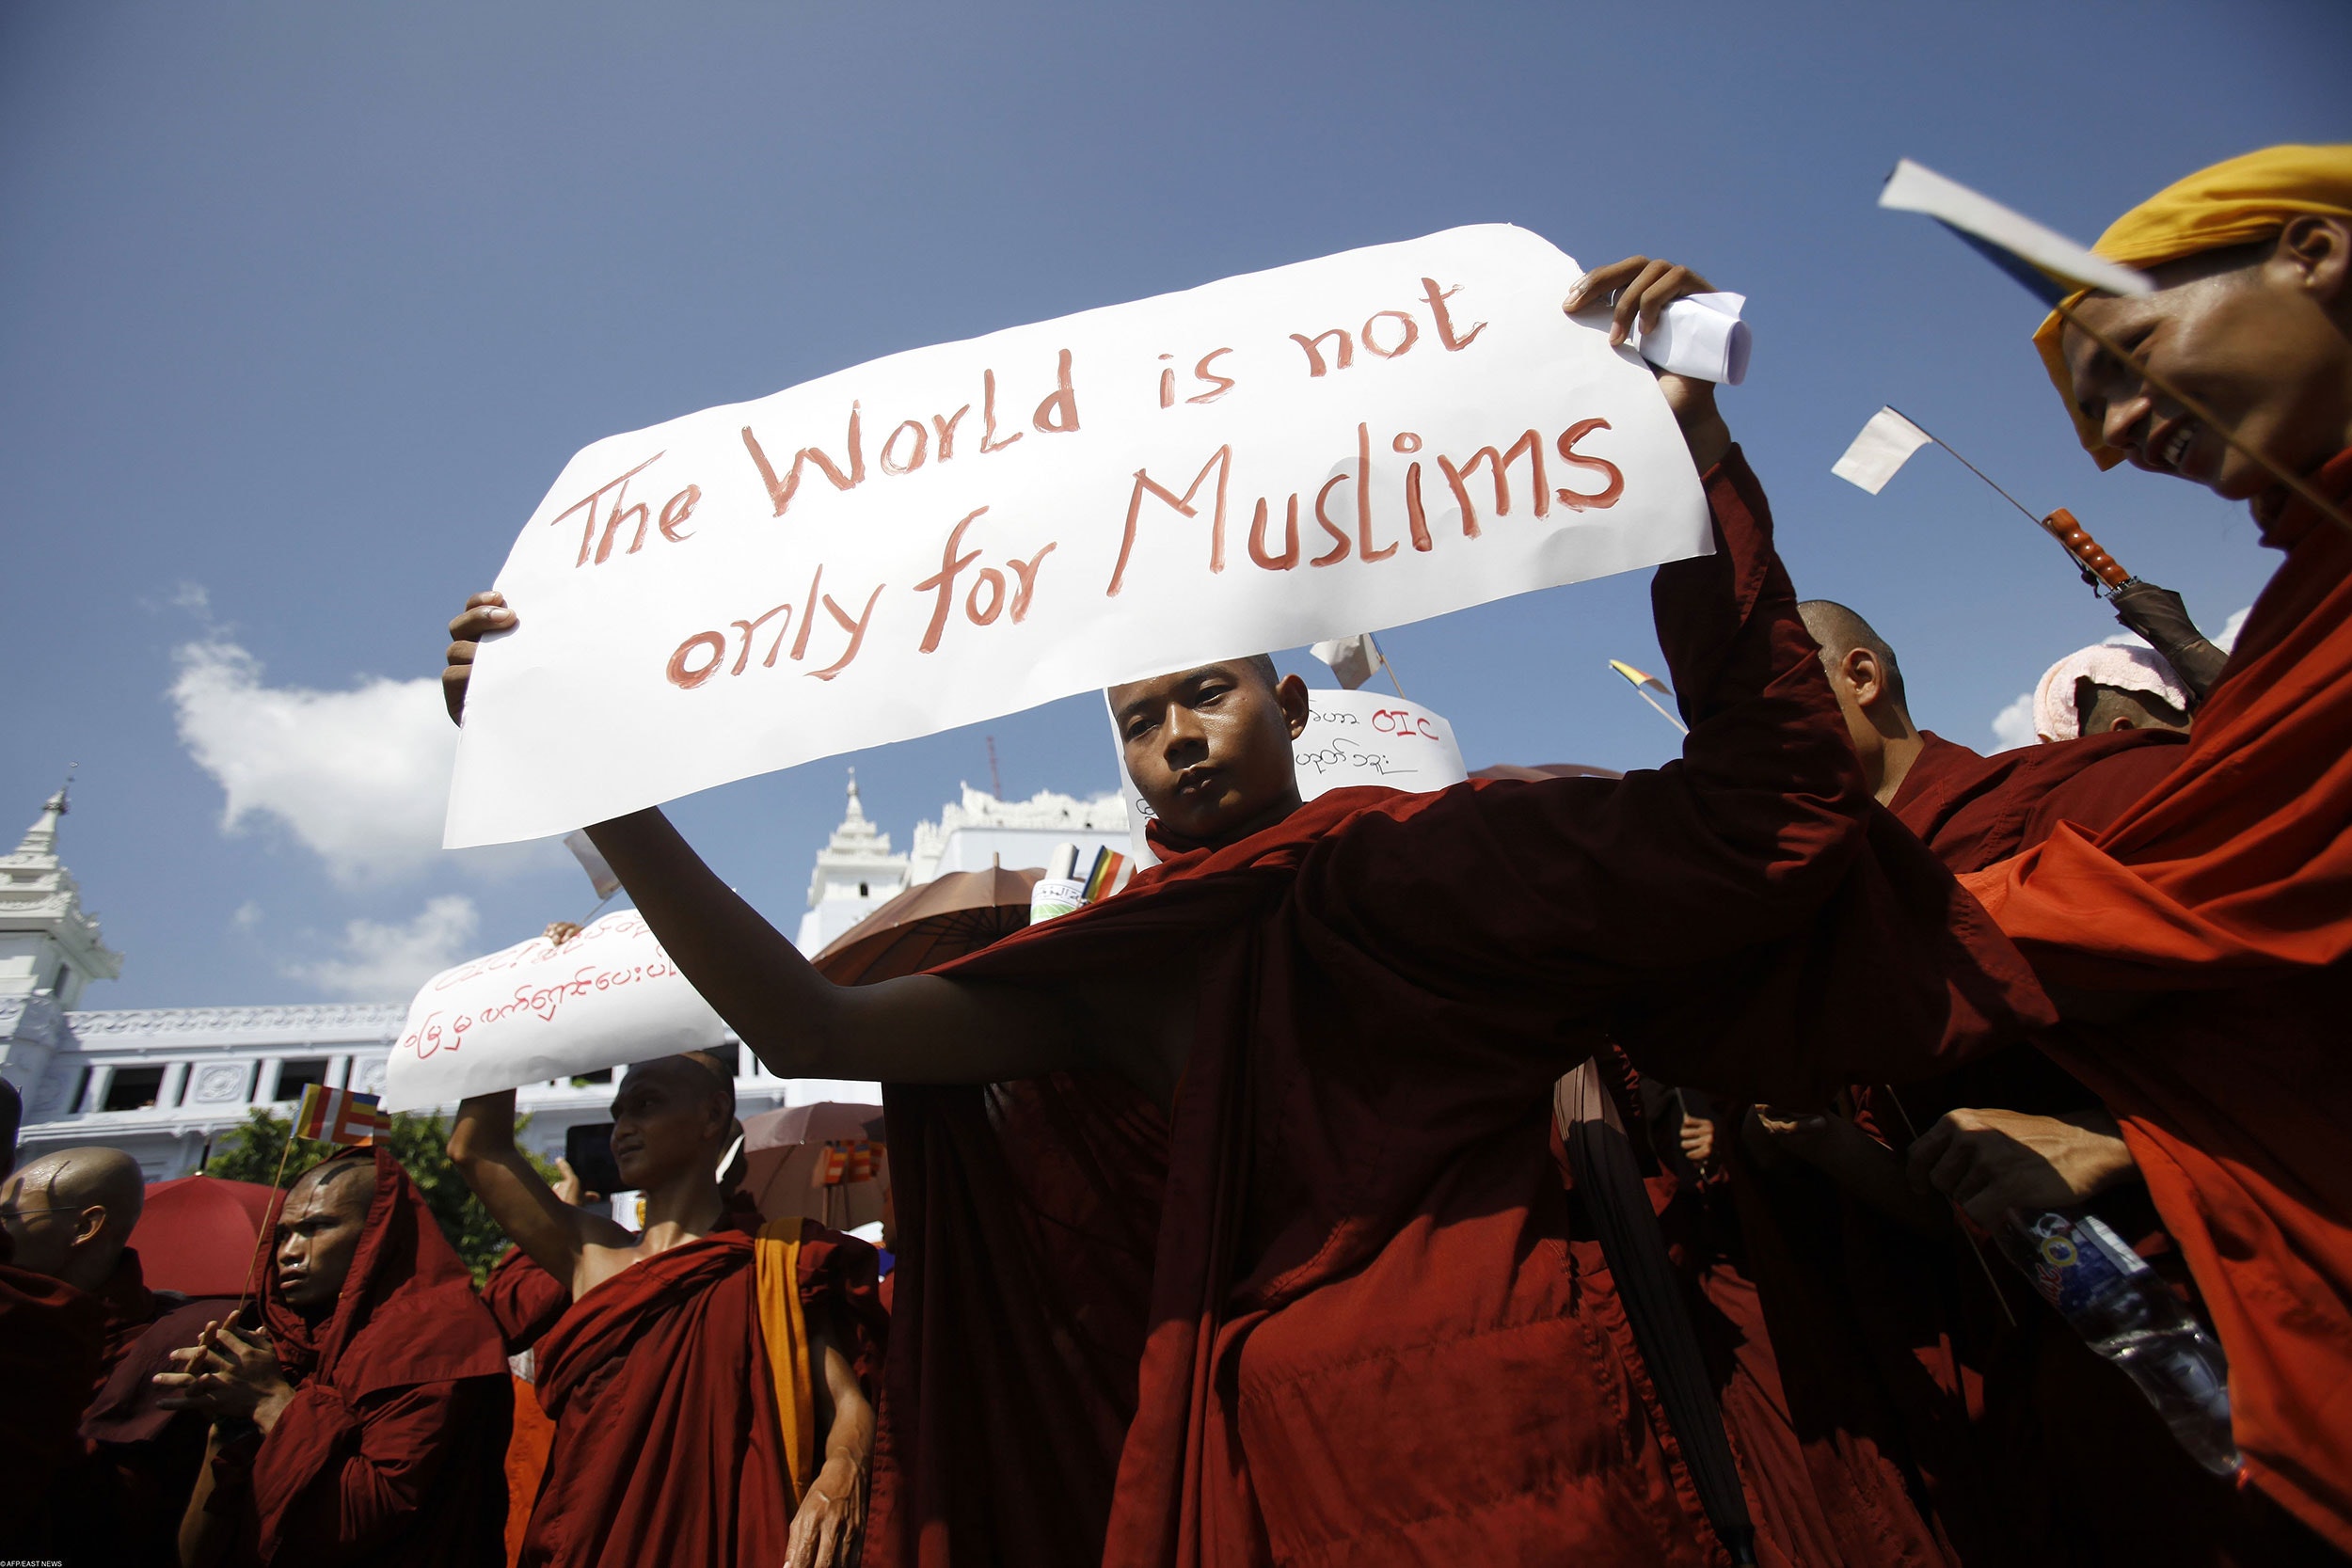 A Myanmar Buddhist monk holds a sign as he takes part in a demonstration against the Organisation of the Islamic Conference in Yangon on October 15, 2012. Thousands of monks took to the streets in Myanmar's two main cities on October 15 to protest against a world Islamic body's attempts to help Muslim Rohingya in unrest-hit Rakhine state, organisers said